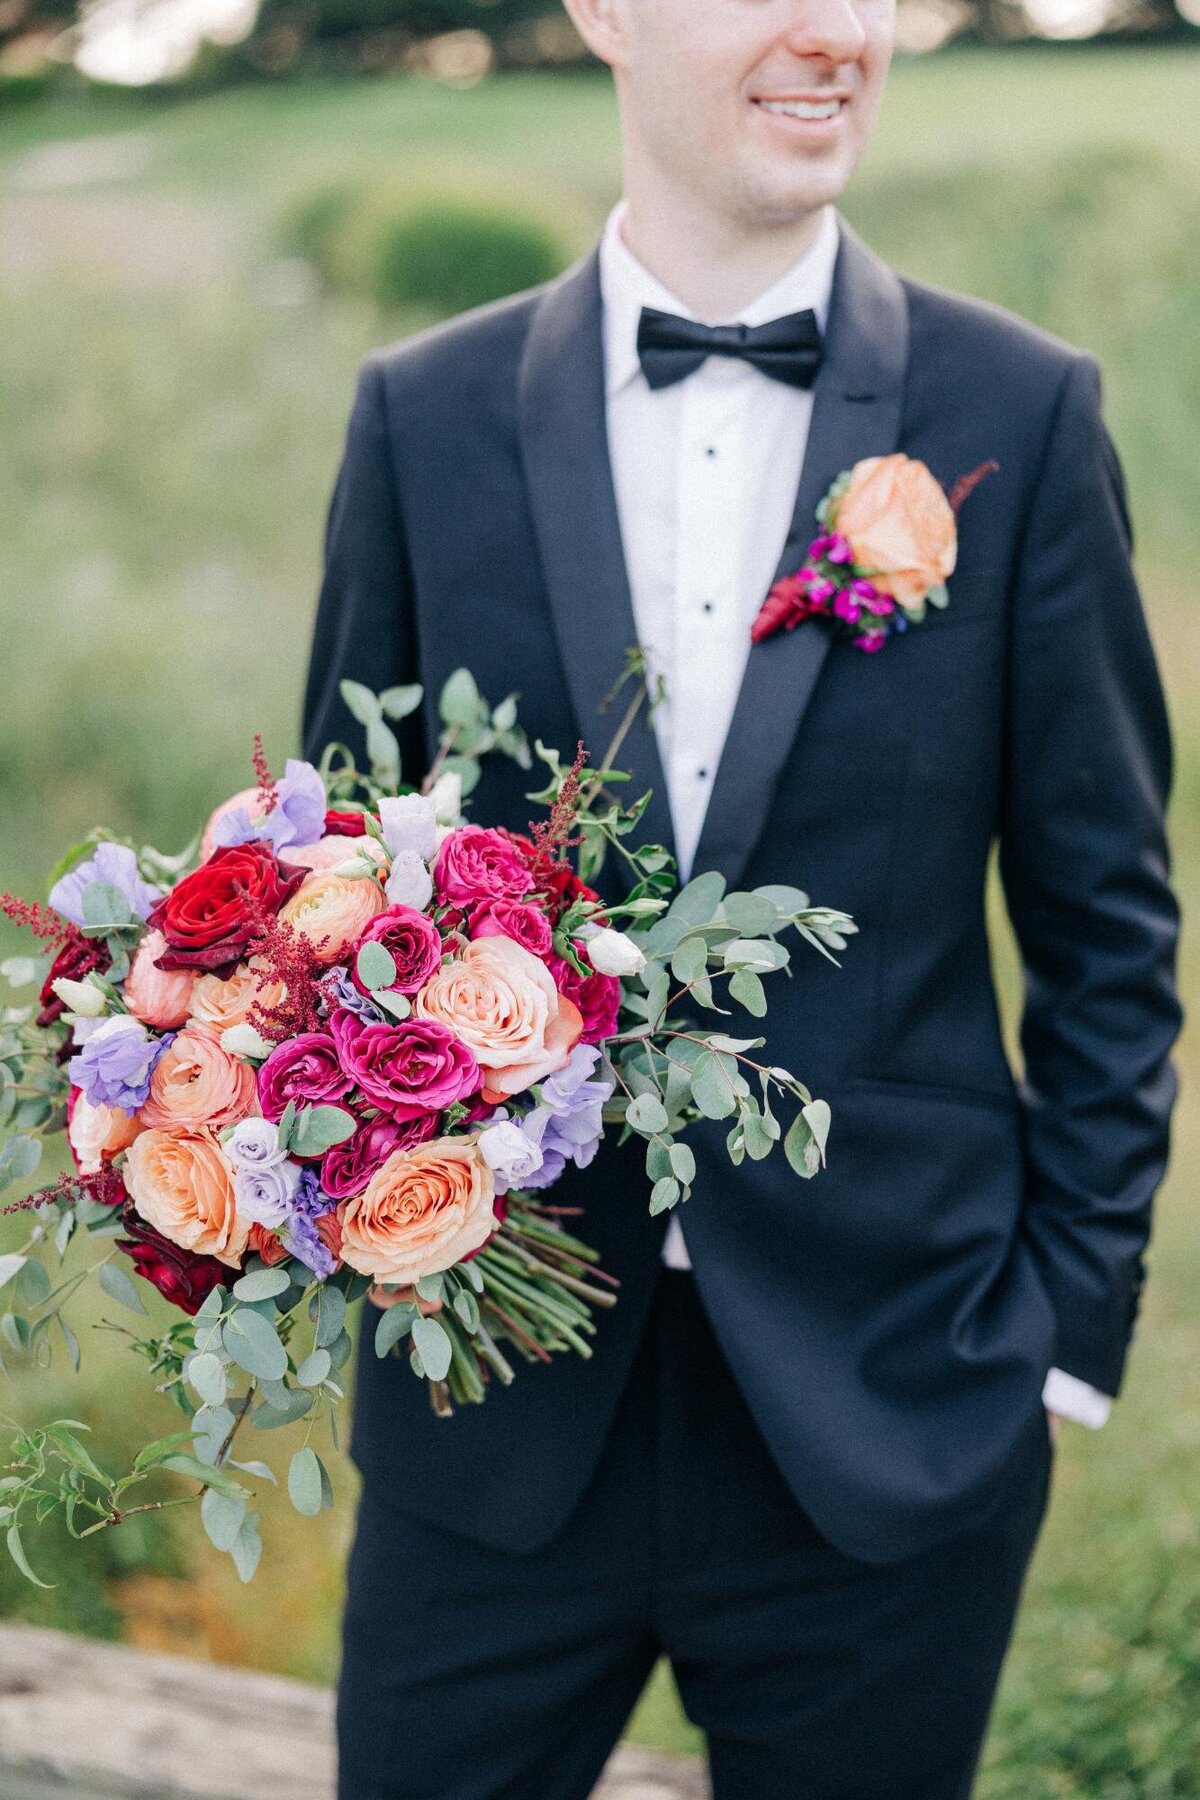 Groom holding a vibrant bridal bouquet, wearing a black tuxedo with a bow tie.